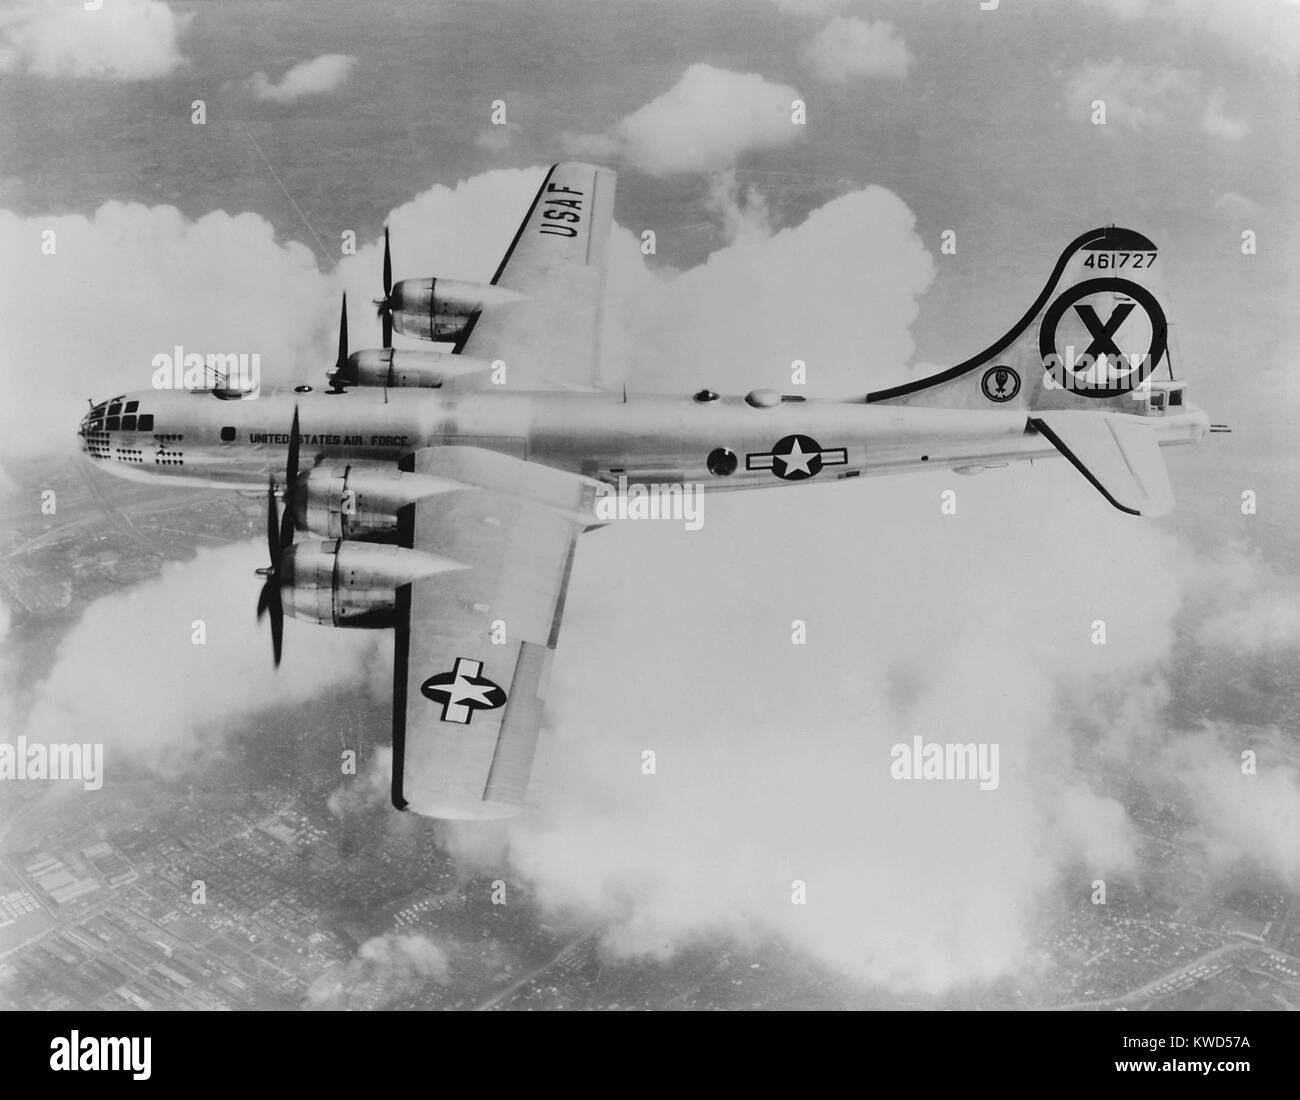 RB-29 of the 31st Reconnaissance Squadron, somewhere over Korea. The reconnaissance version of the Superfortress bomber performed target and bomb-damage assessment photography. They also conducted electronic reconnaissance of enemy ground radar. Their daylight missions were dangerous as they were vulnerable the MiG jet fighters. Korean War, 1950-53. (BSLOC 2014 11 219) Stock Photo